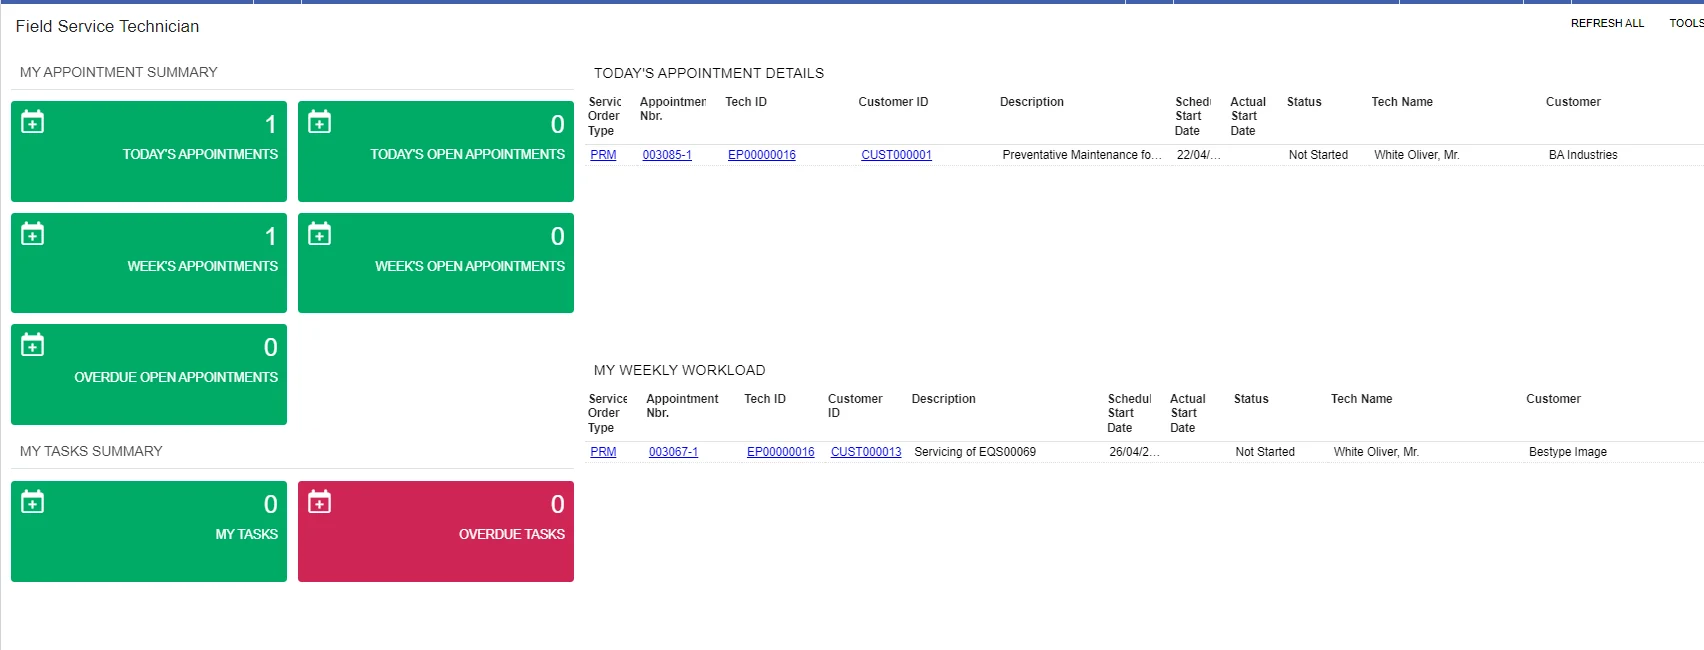 Automate workflows with a clear view of appointments and customer information for each field service technician.